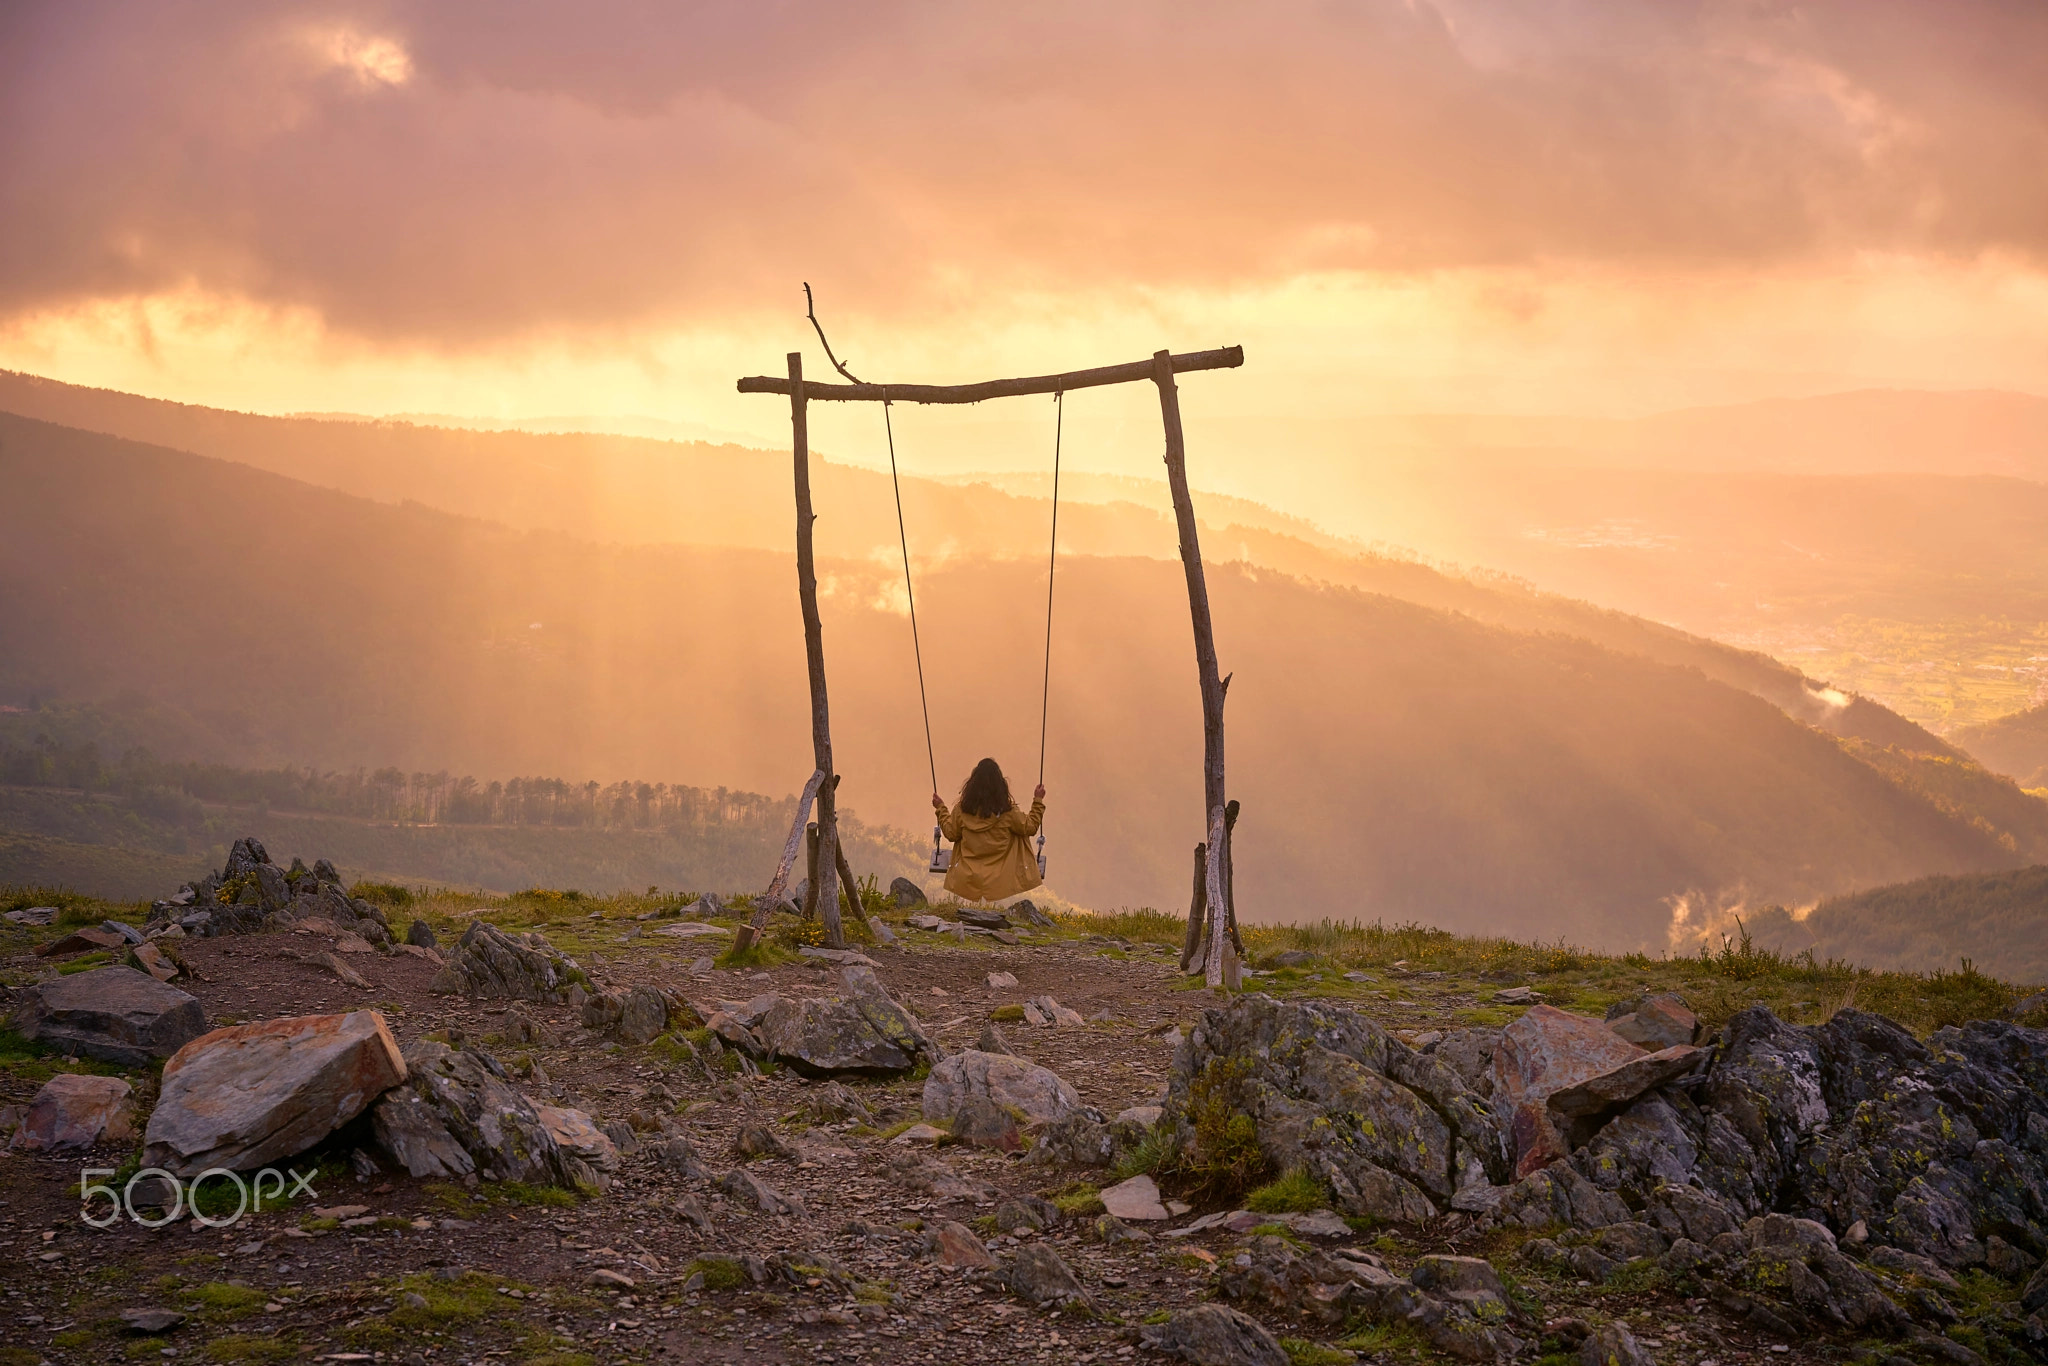 Woman girl swinging on a Swing in Lousa mountain, Portugal at sunset